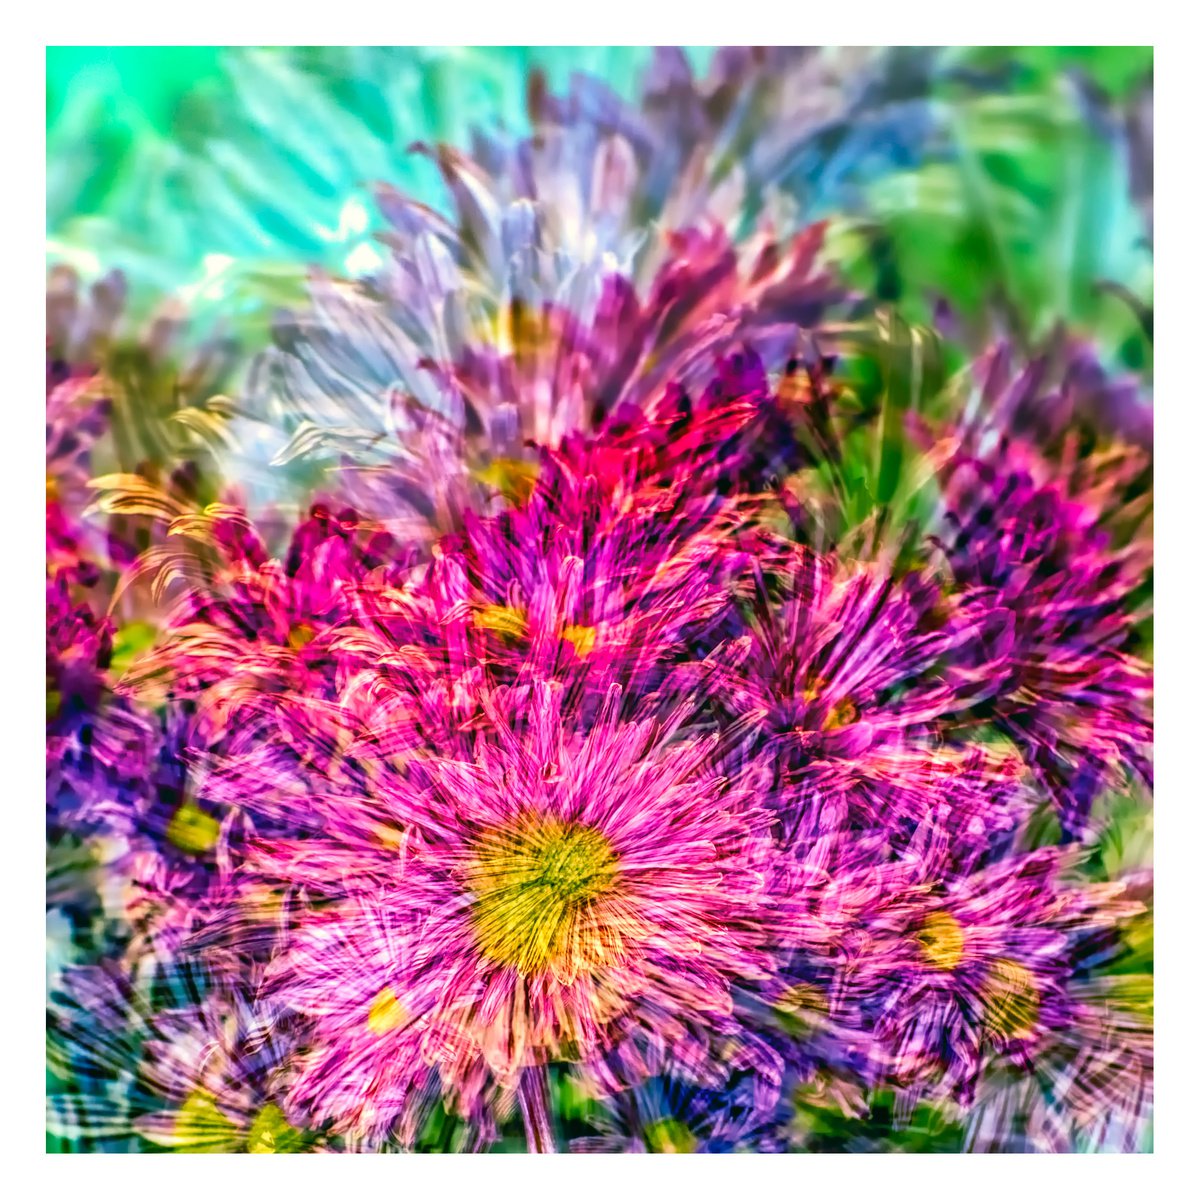 Abstract Flowers #9. Limited Edition 1/25 12x12 inch Photographic Print. by Graham Briggs